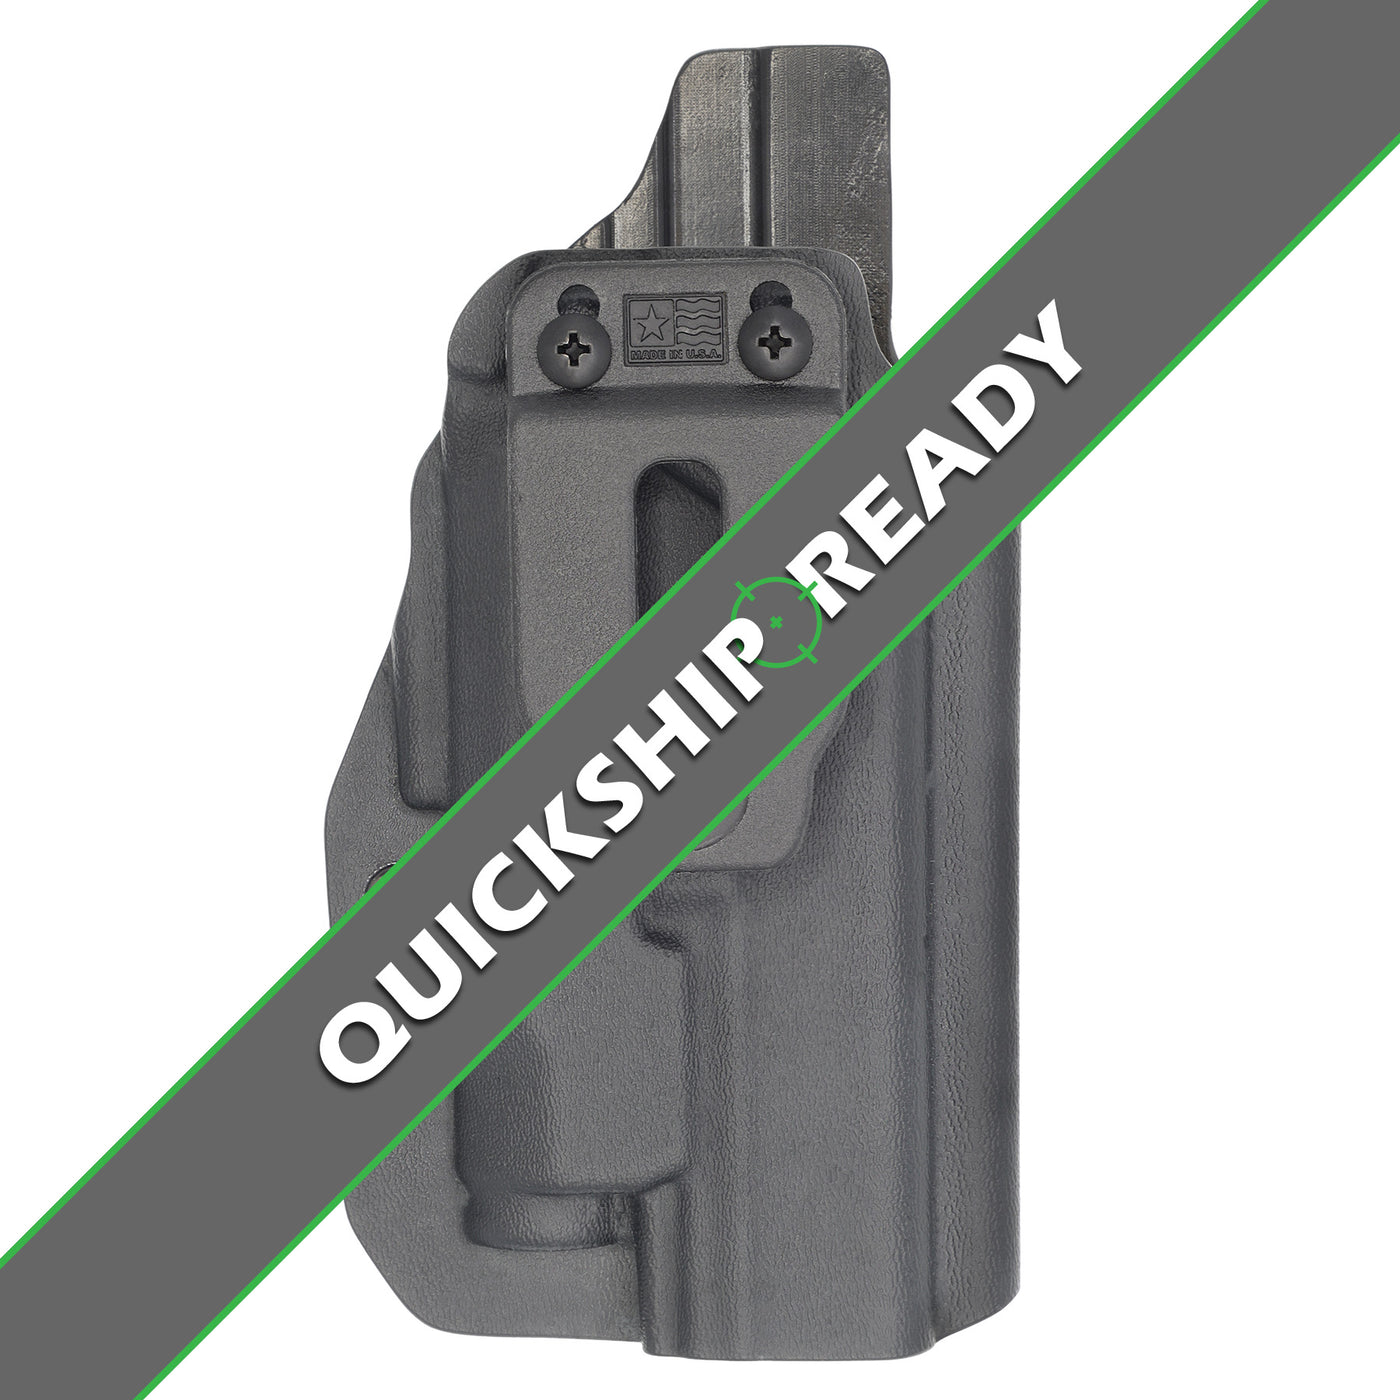 This is the quickship C&G Holsters inside the waistband Tactical Holster for the Glock 17 with Inforce APLc.